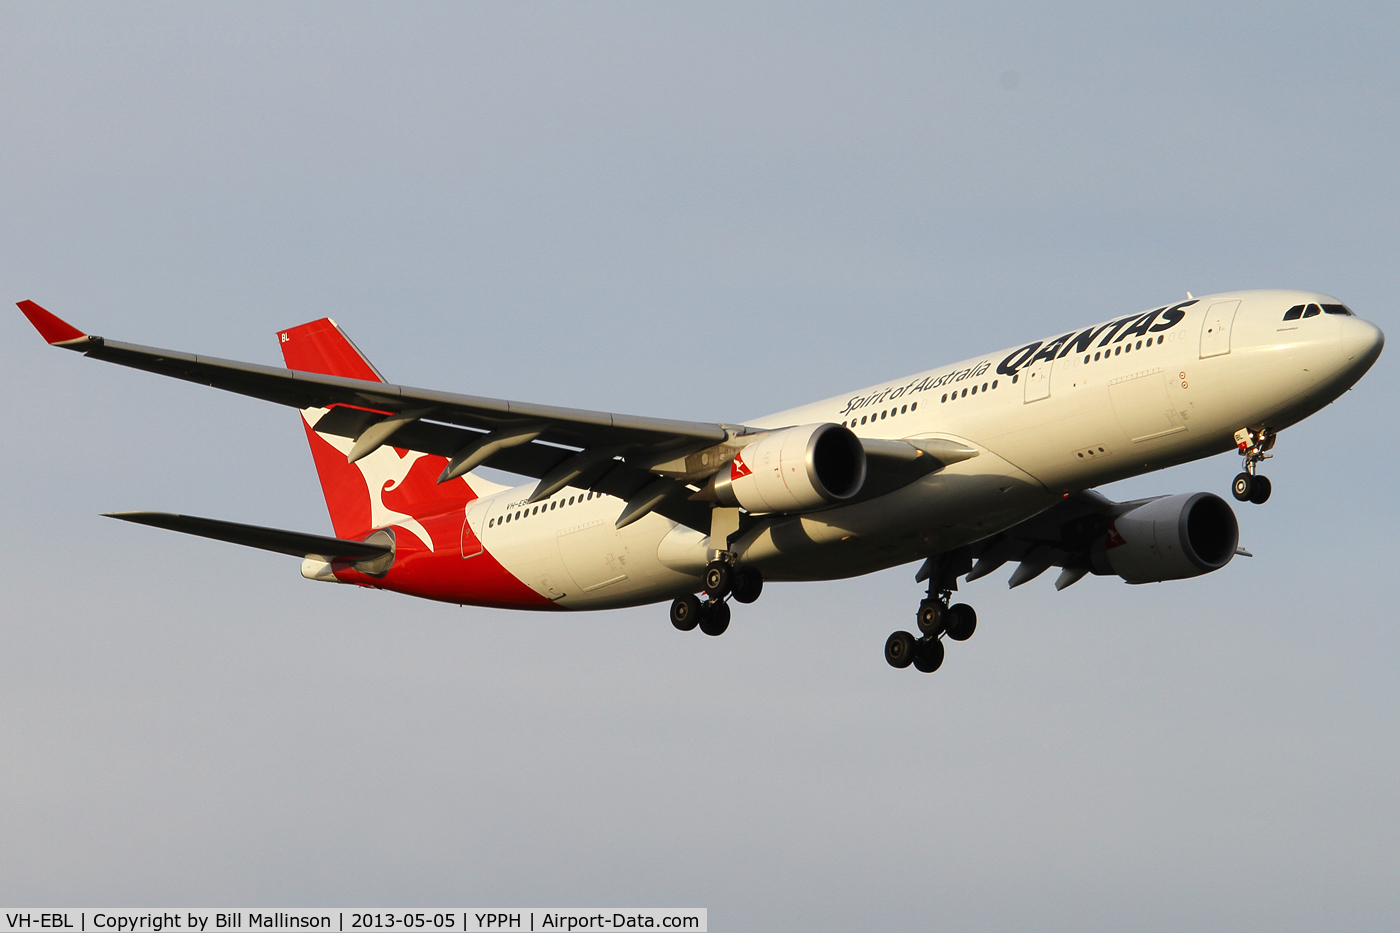 VH-EBL, 2008 Airbus A330-203 C/N 976, finals to 21